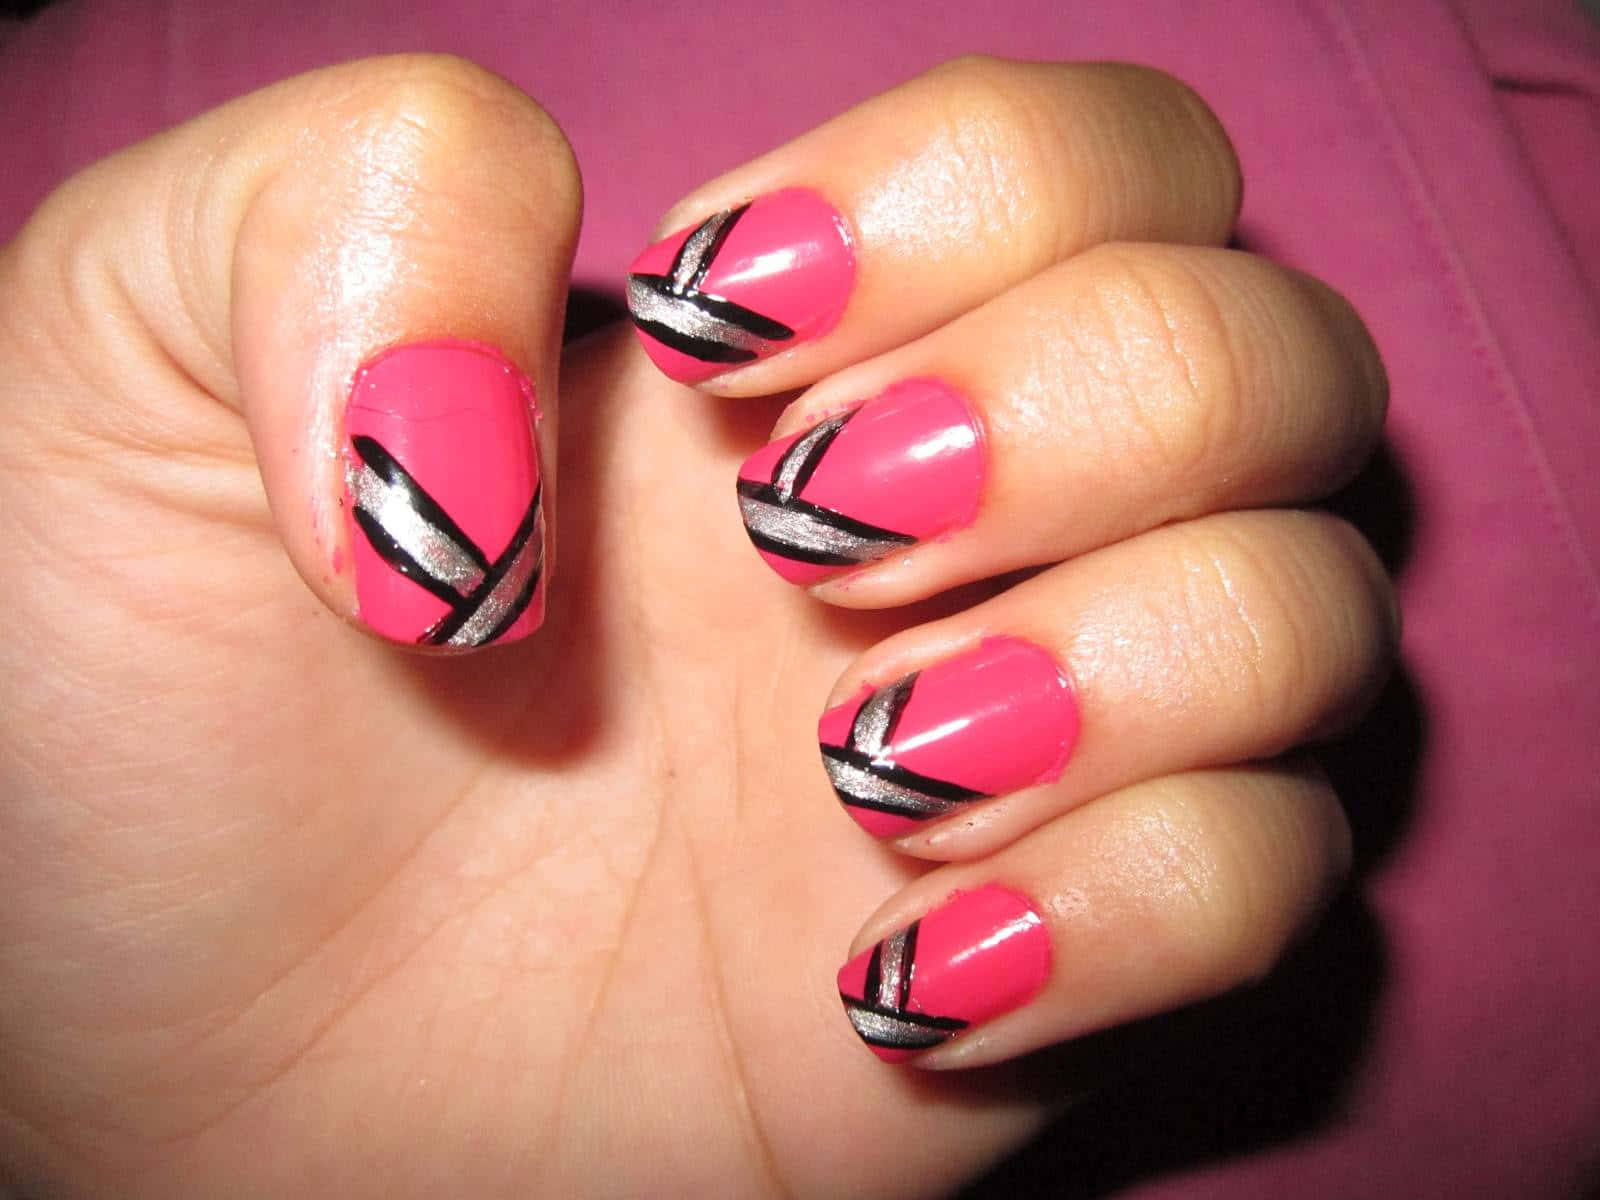 Cute Nails Design on Pink Background Wallpaper